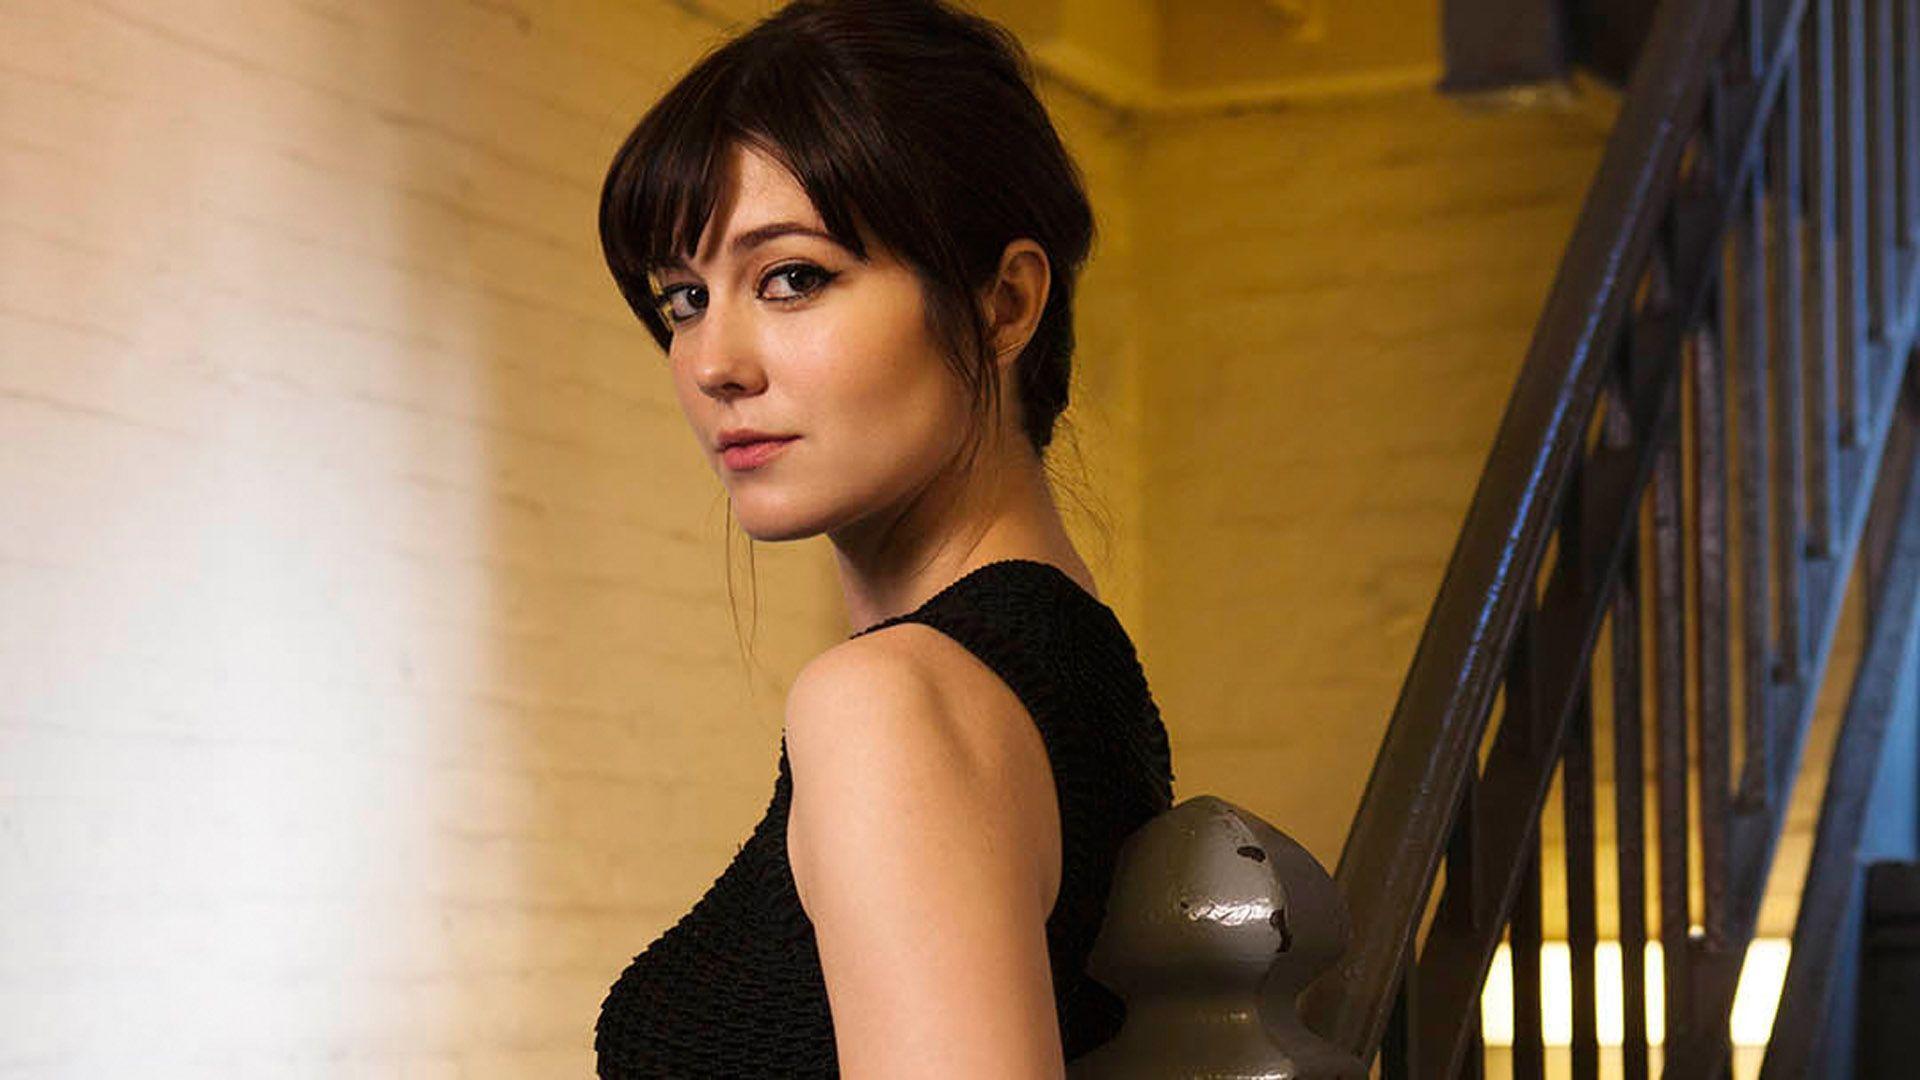 Mary Elizabeth Winstead Wallpapers Collection For Free Download.